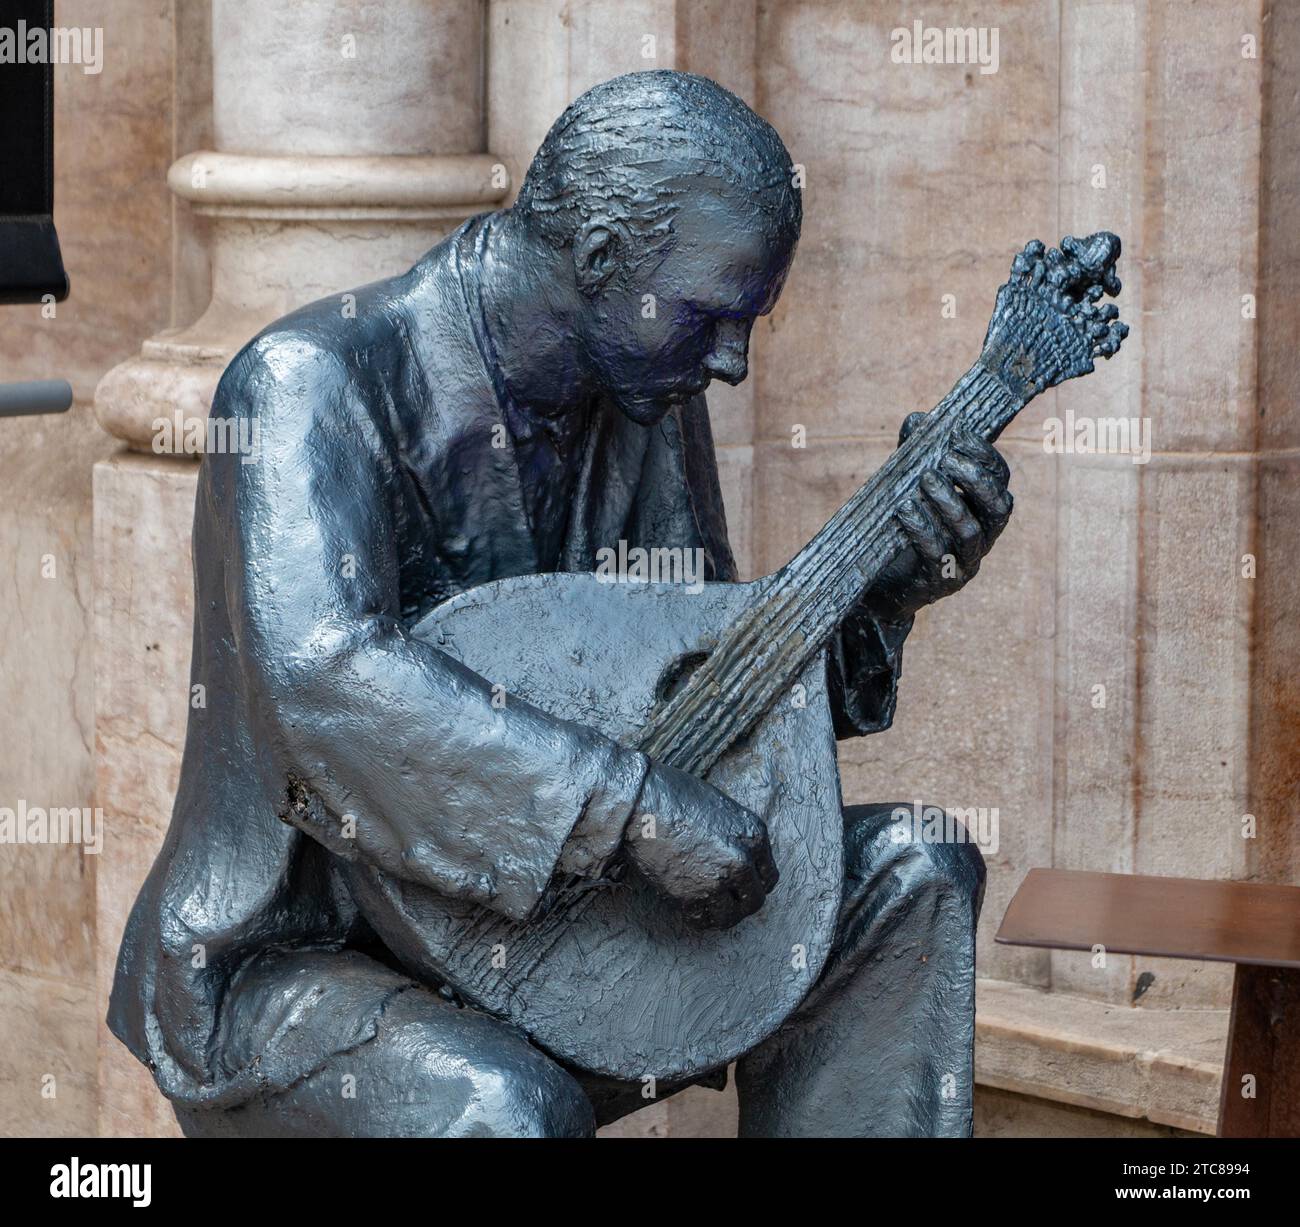 A picture of a sculpture showing a Portuguese guitar player, representing the Fado music genre, traditional of Portugal (Lisbon) Stock Photo